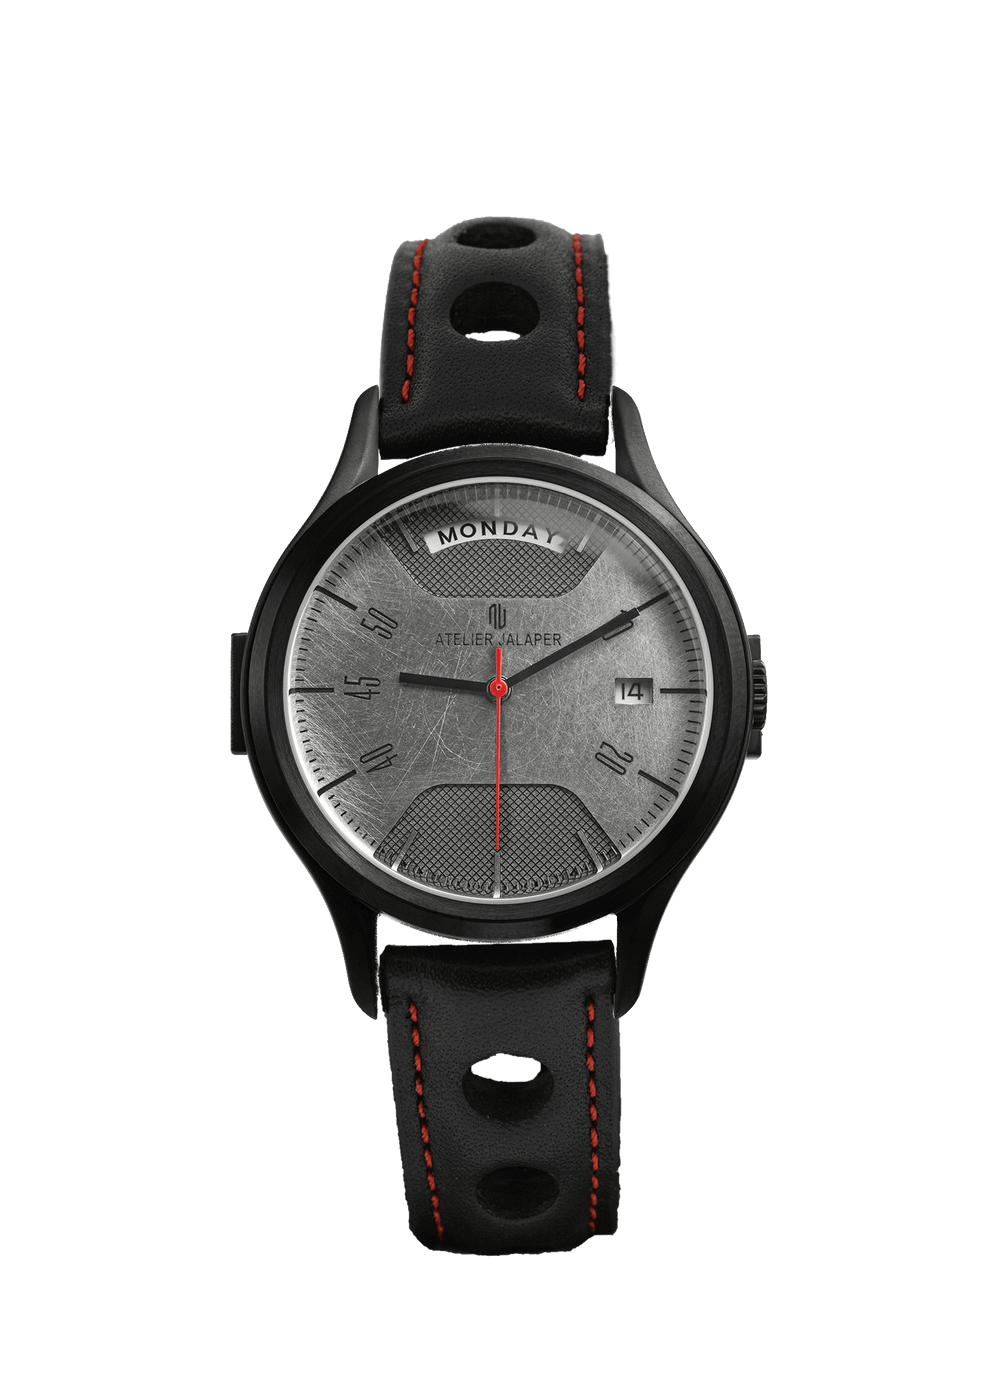 Watch strap worn on an AJ002-B - Genuine Black Leather with Red colour Stitchings and three perforations on each side